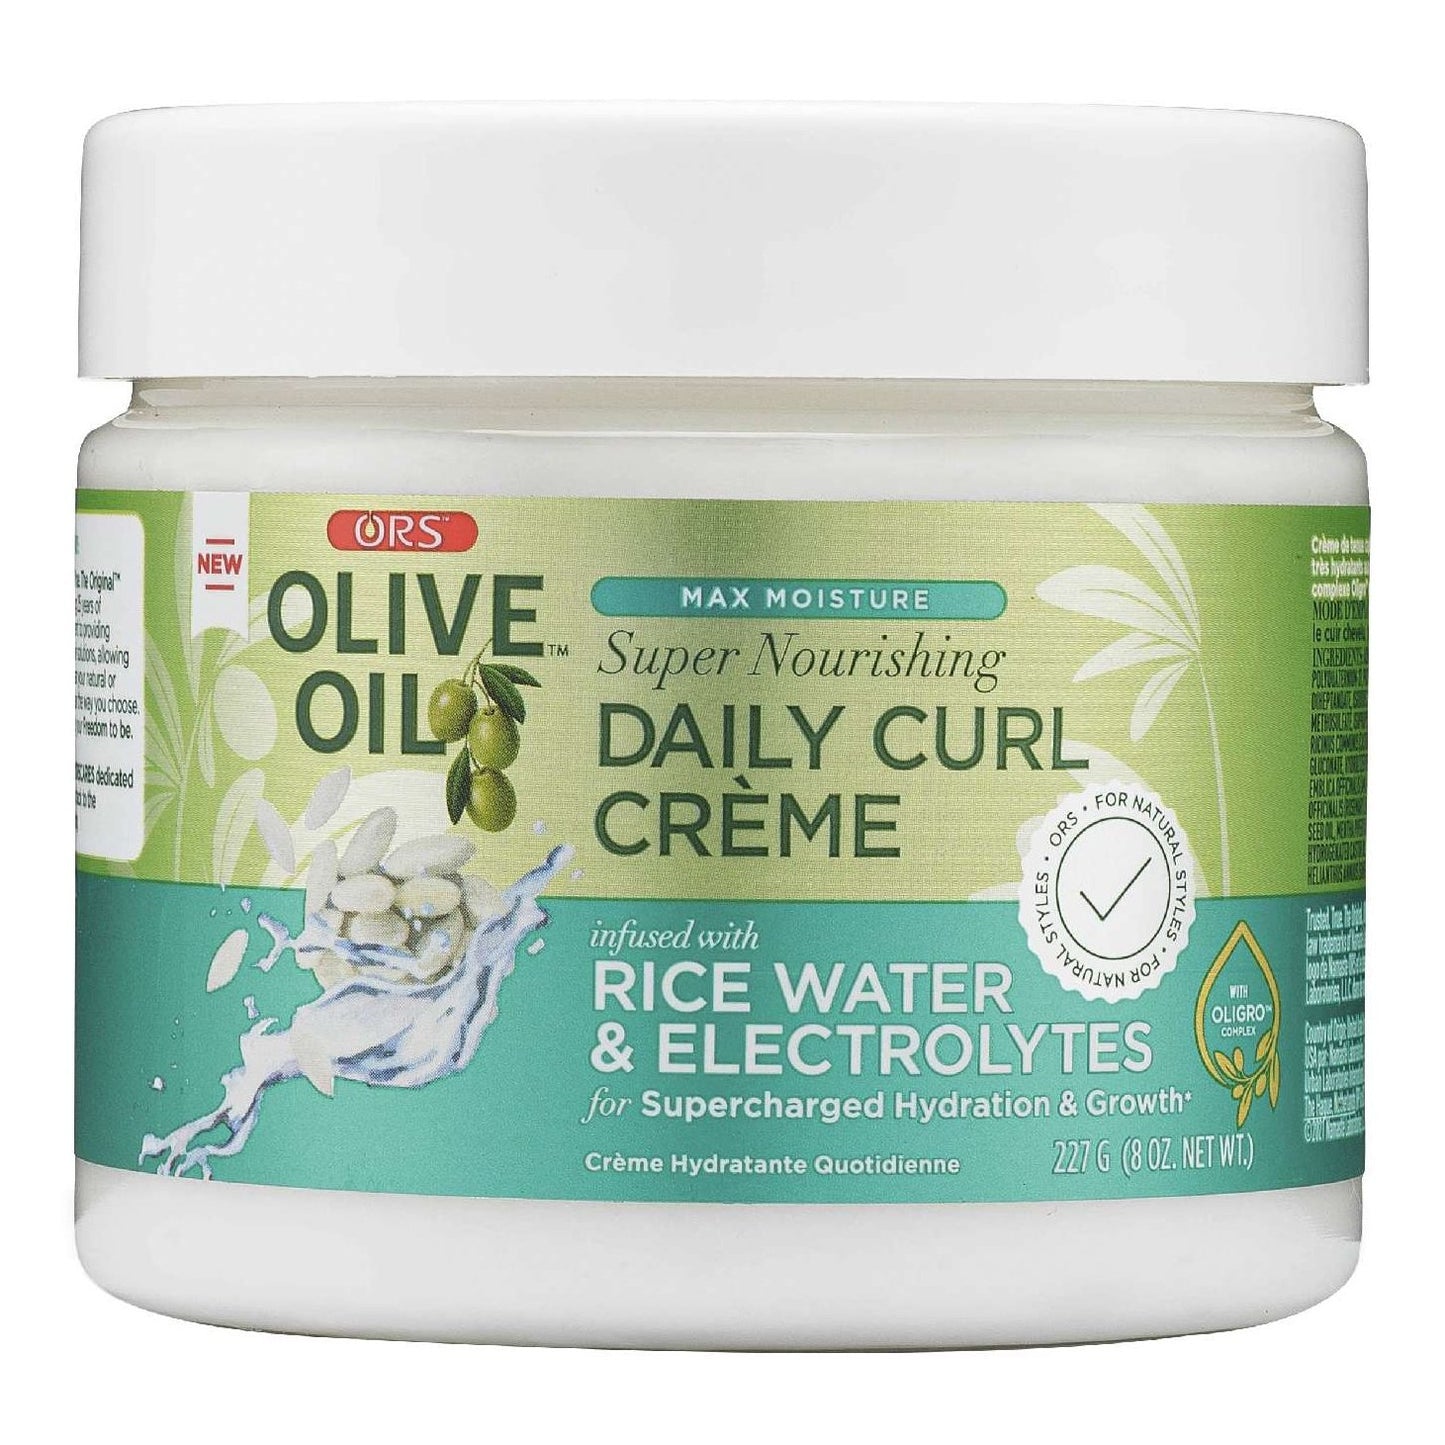 Ors Olive Oil Max Moisture Daily Curl Creme 8 Oz